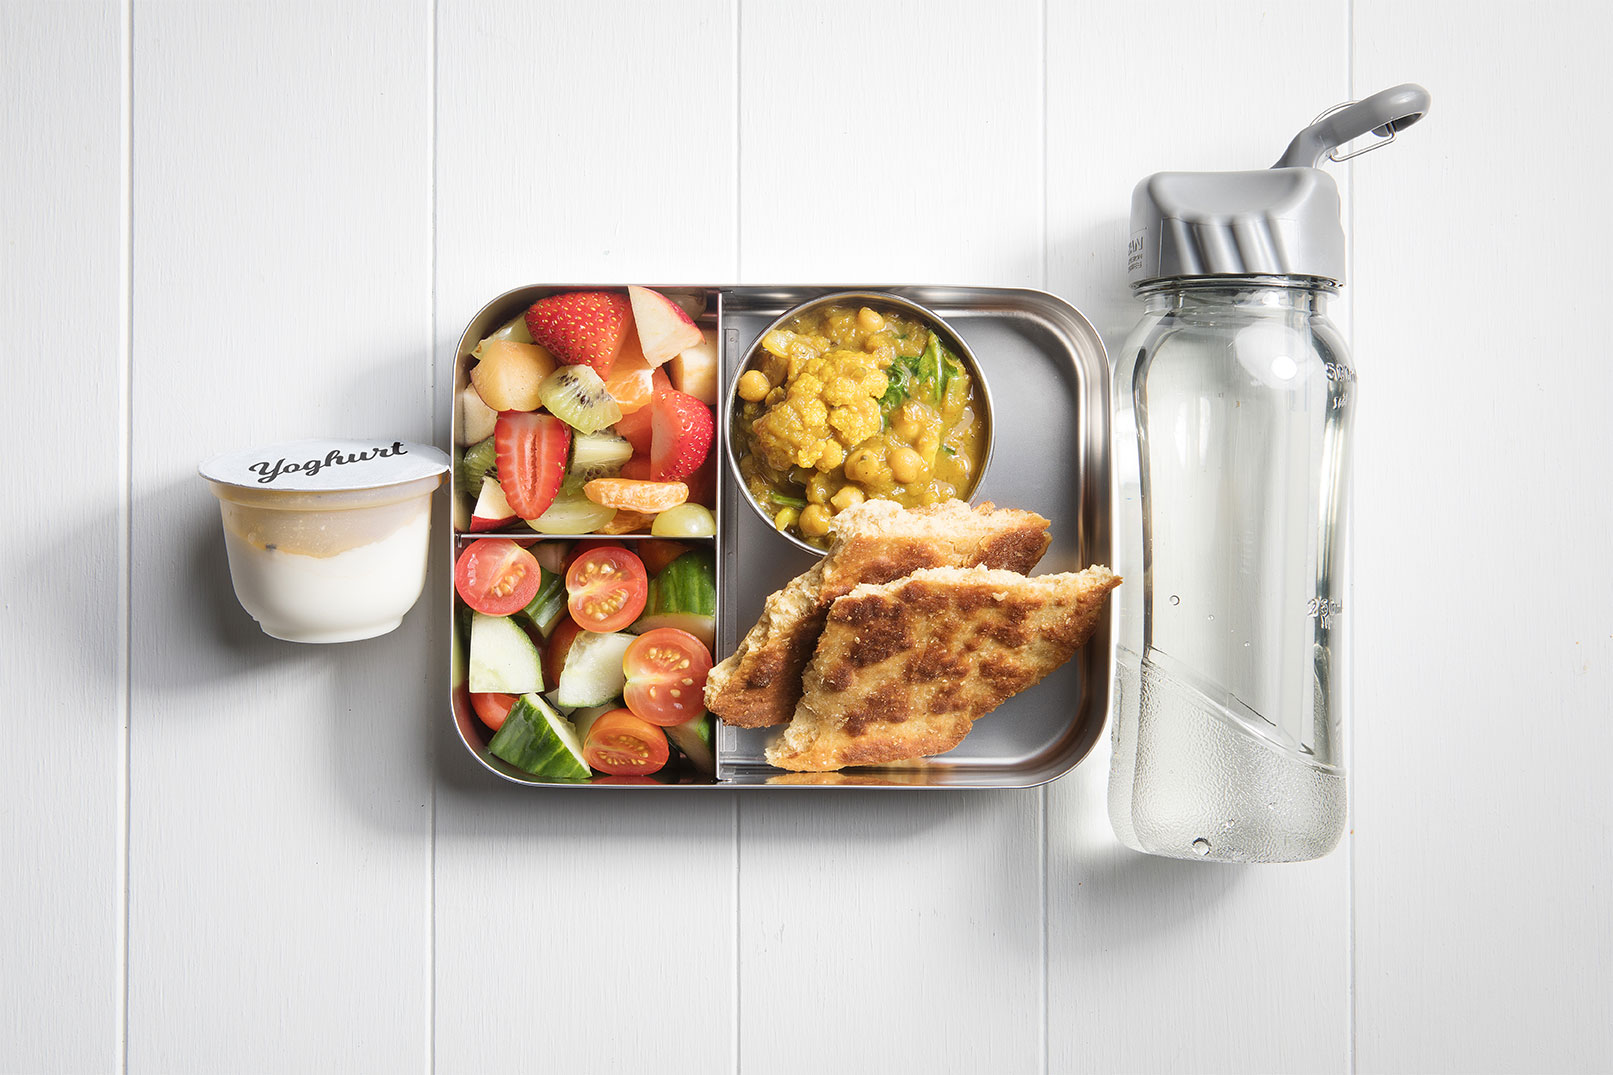 Image of a packed lunch box with cauliflower and spinach dahl, naan bread, csalad and a yoghurt tub and bottle of water on the side